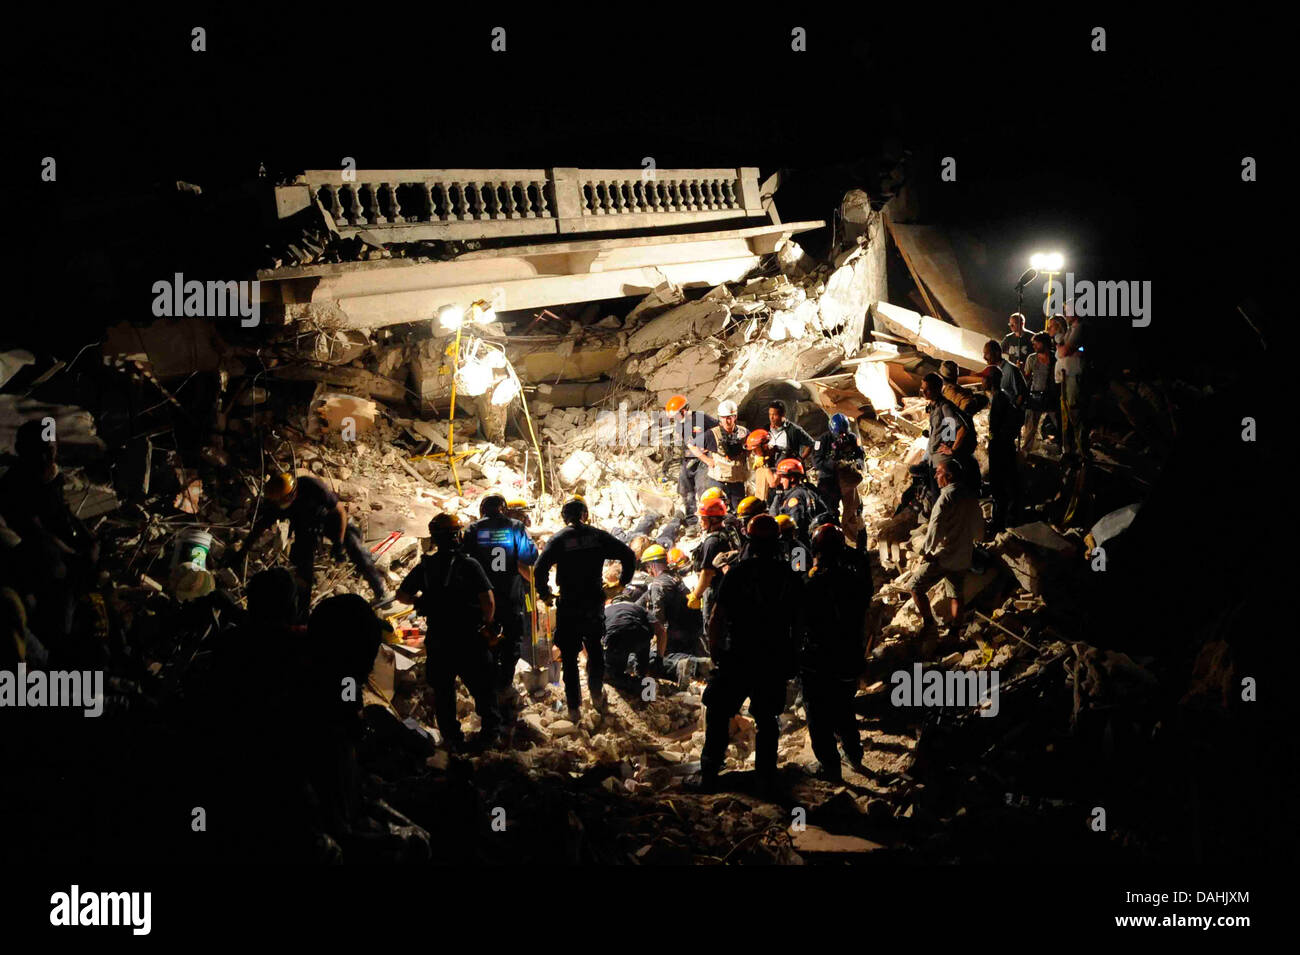 Members of the Los Angeles County Fire Department Search and Rescue Team clear debris at a collapsed building in the aftermath of a 7.0 magnitude earthquake that killed 220,000 people January 17, 2010 in Port-au-Prince, Haiti. Stock Photo